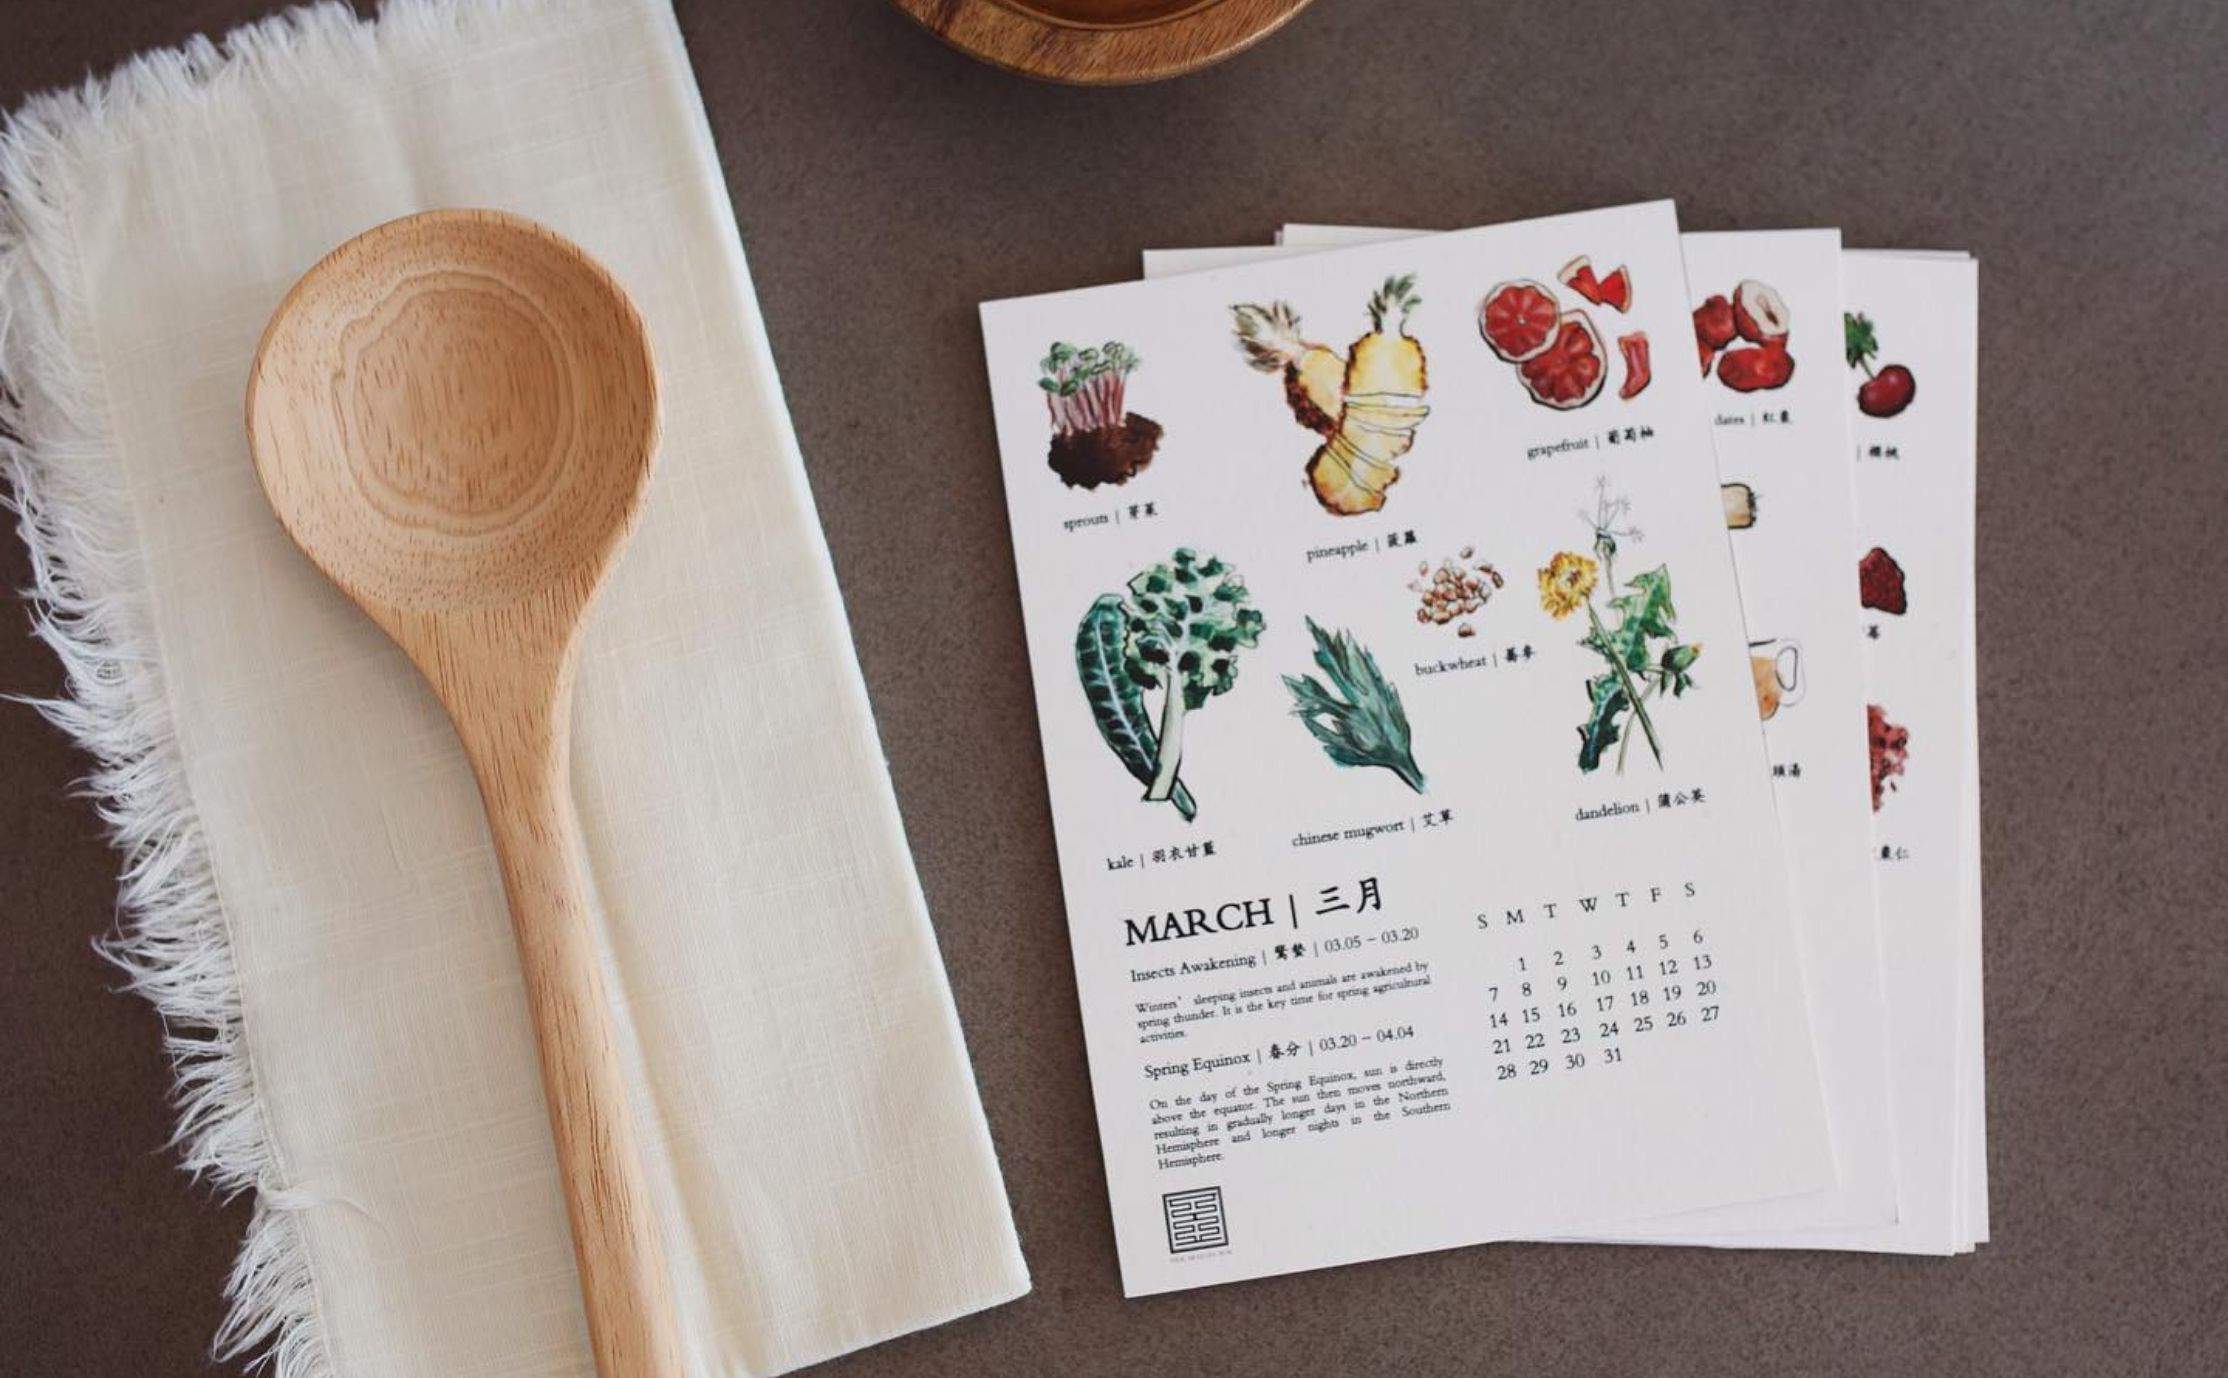 Seasonal eating calendar with watercolour illustrations of food items, placed next to a wooden spoon